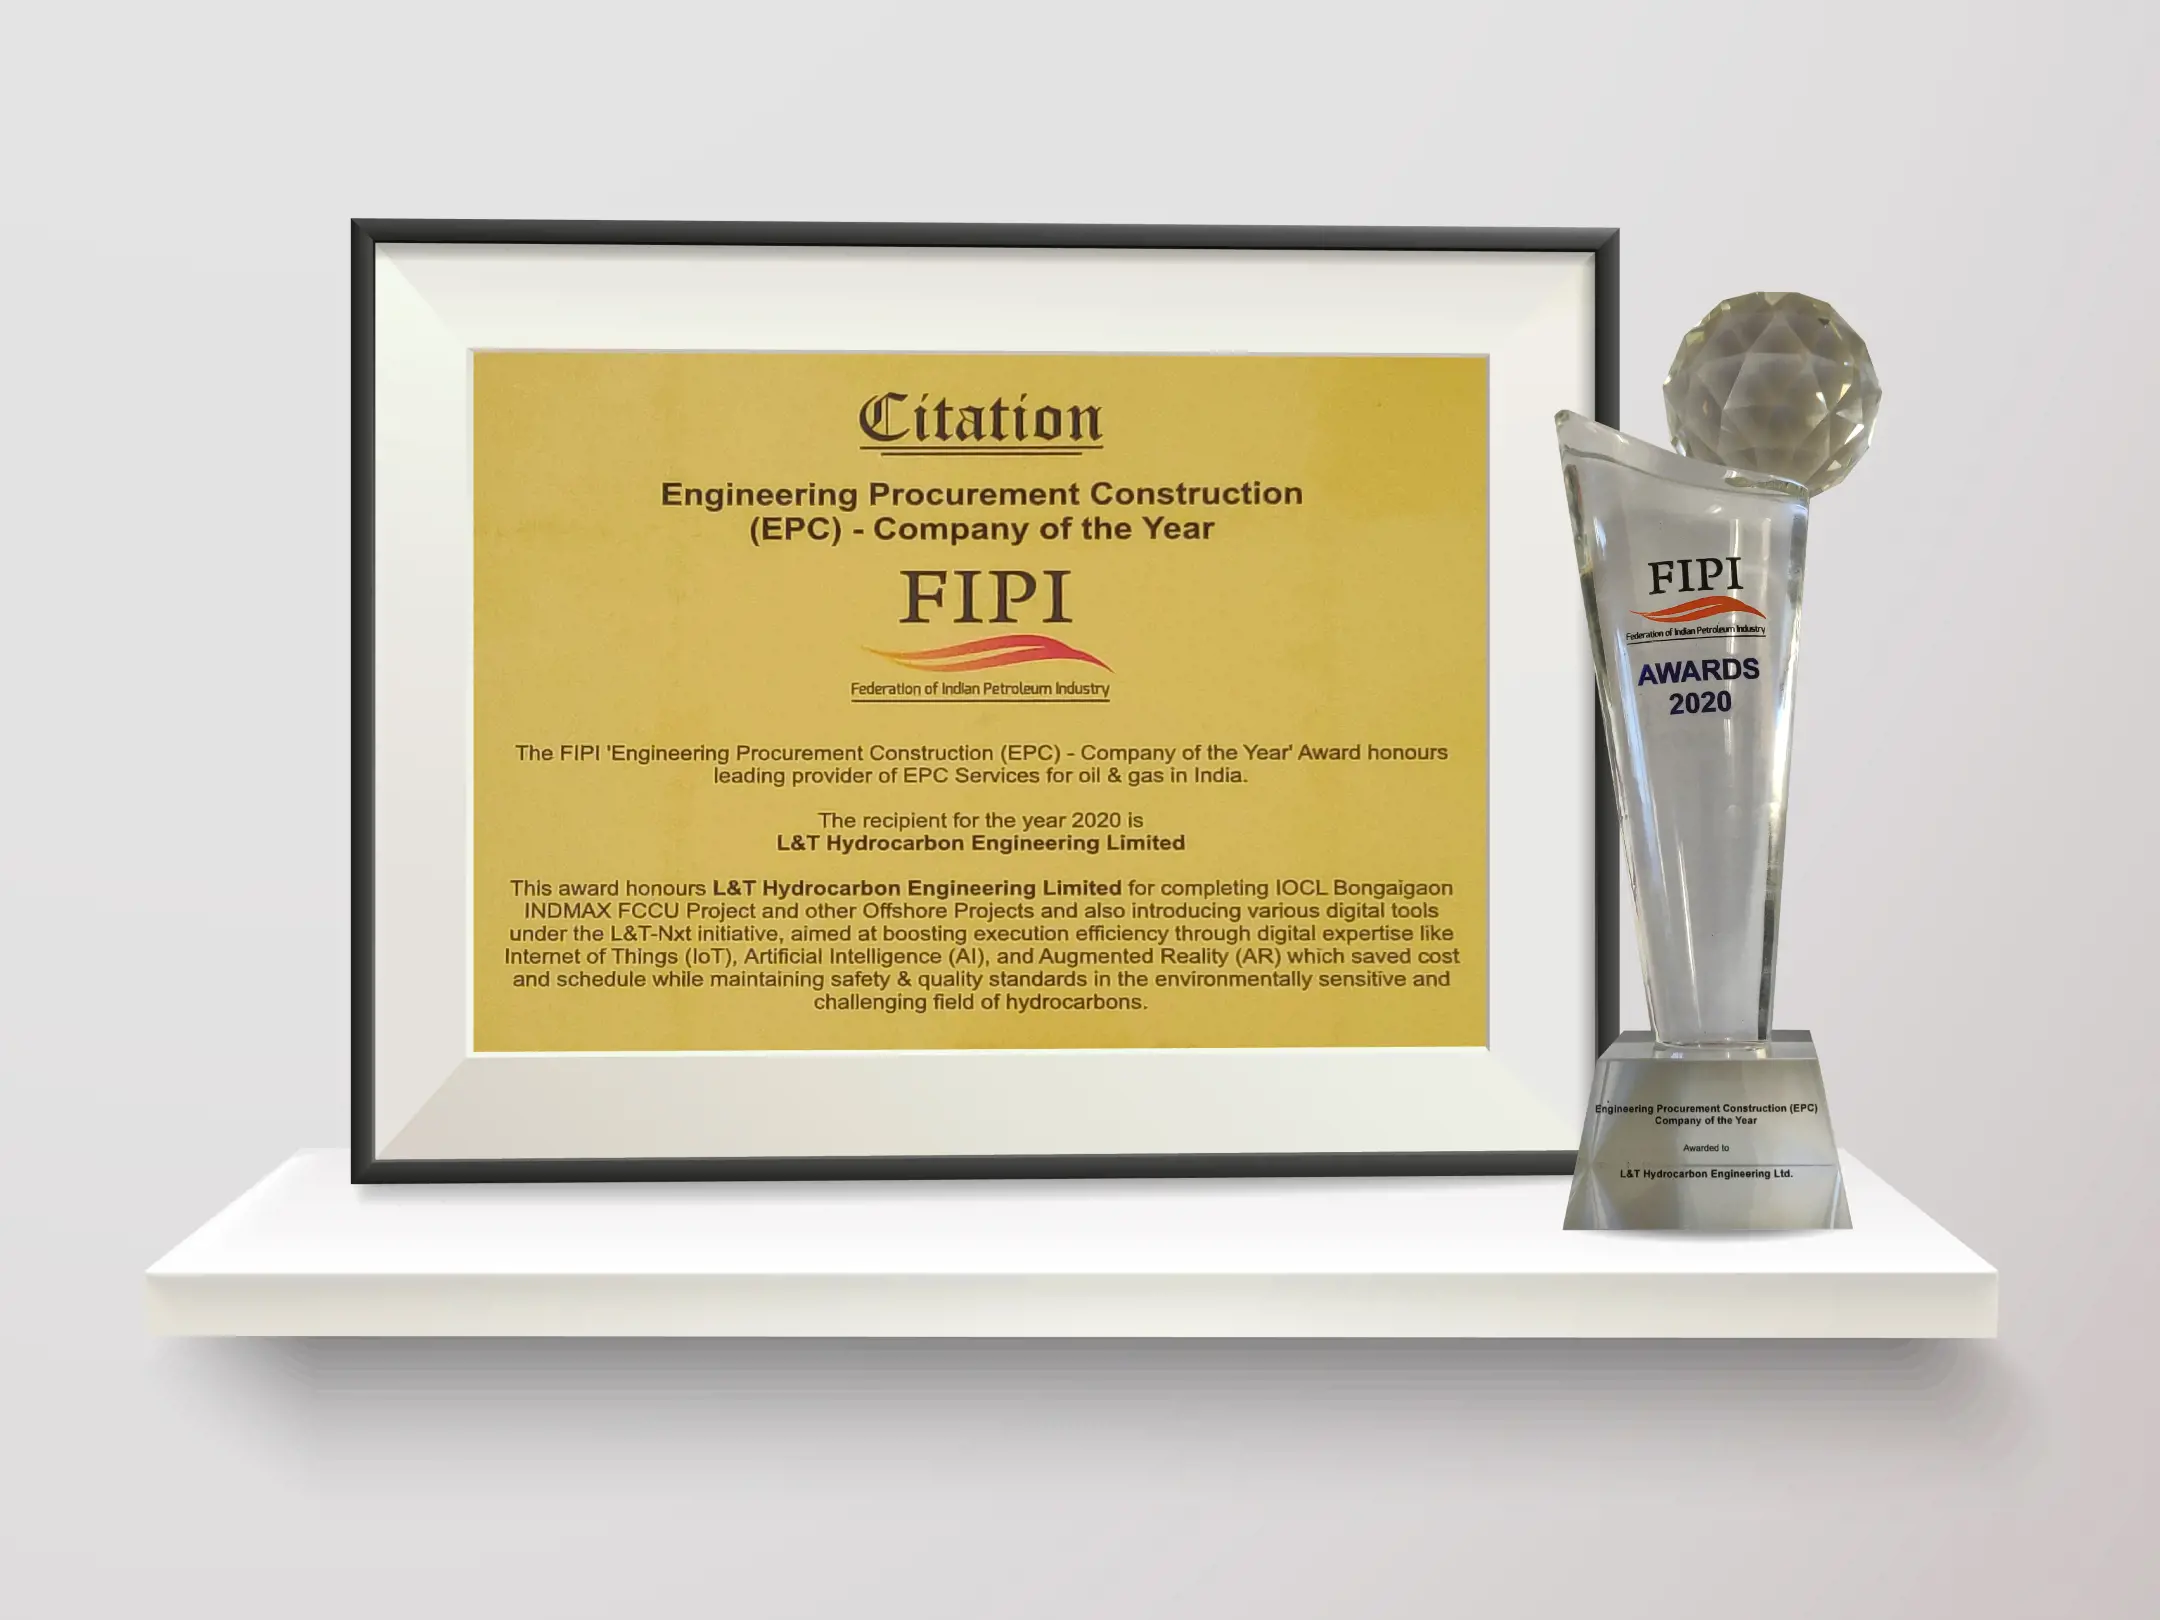 Another feather in LTHE’s cap – FIPI EPC Company of the Year 2020 Award